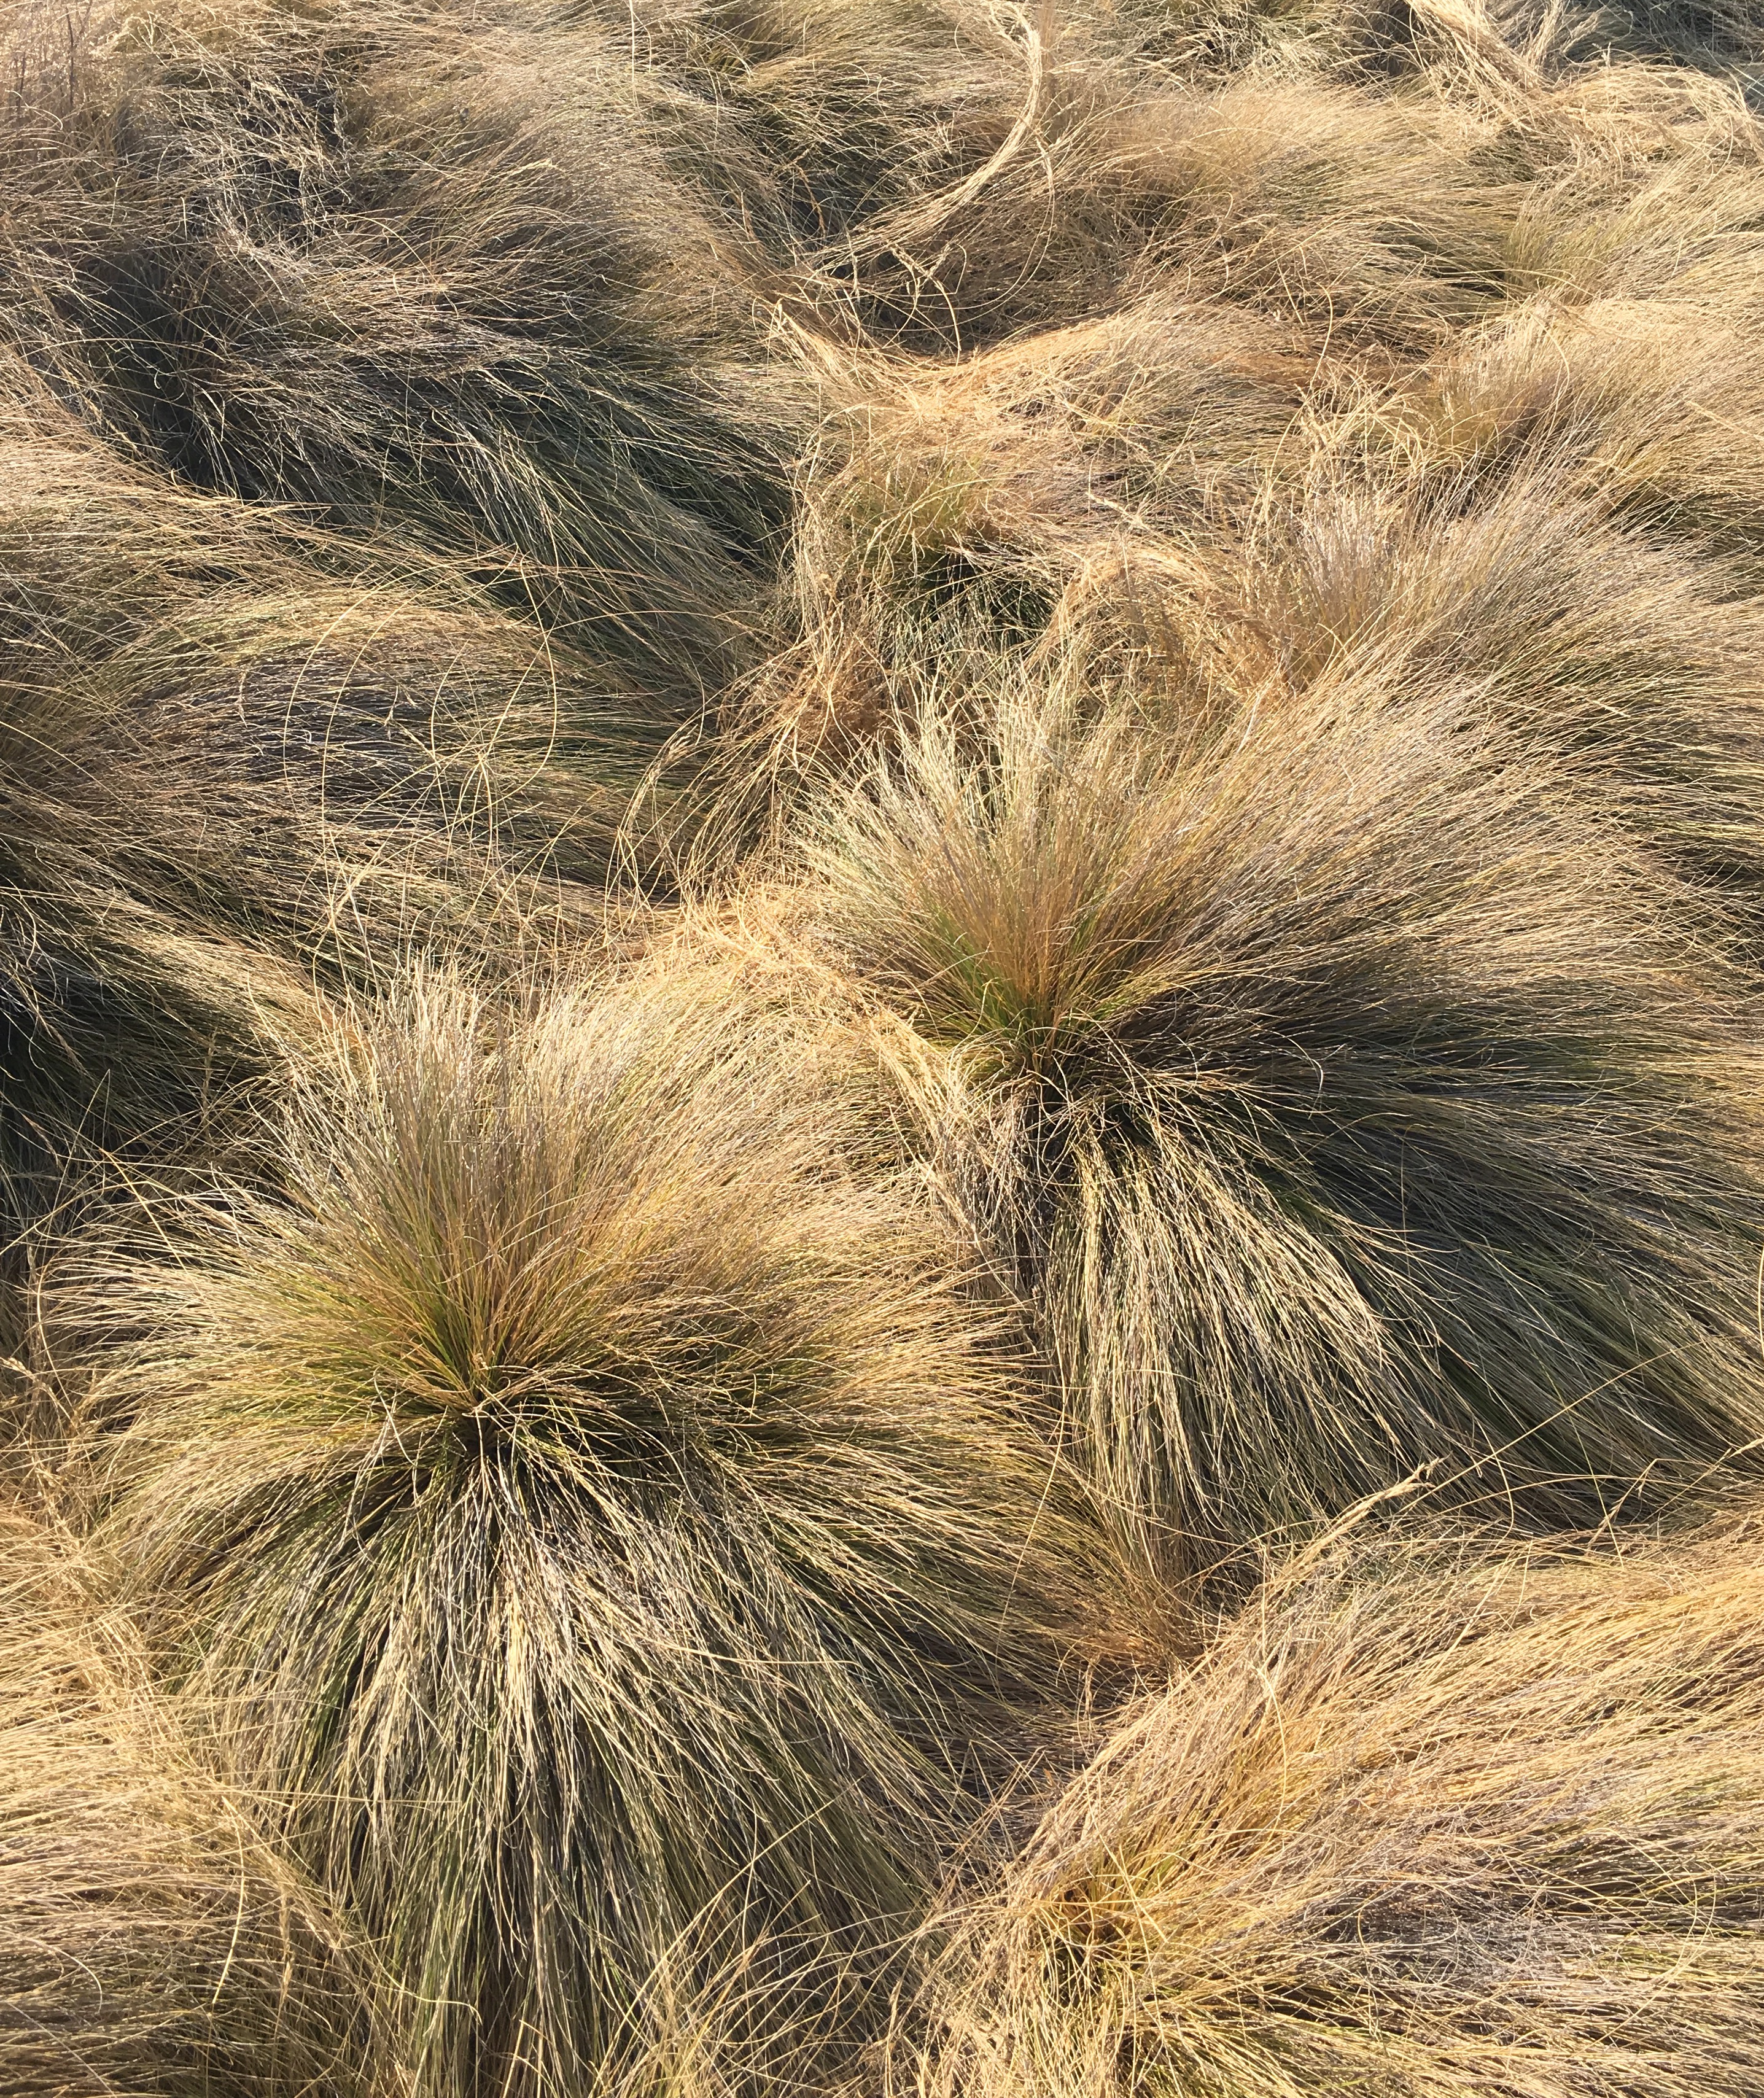 Dying grass